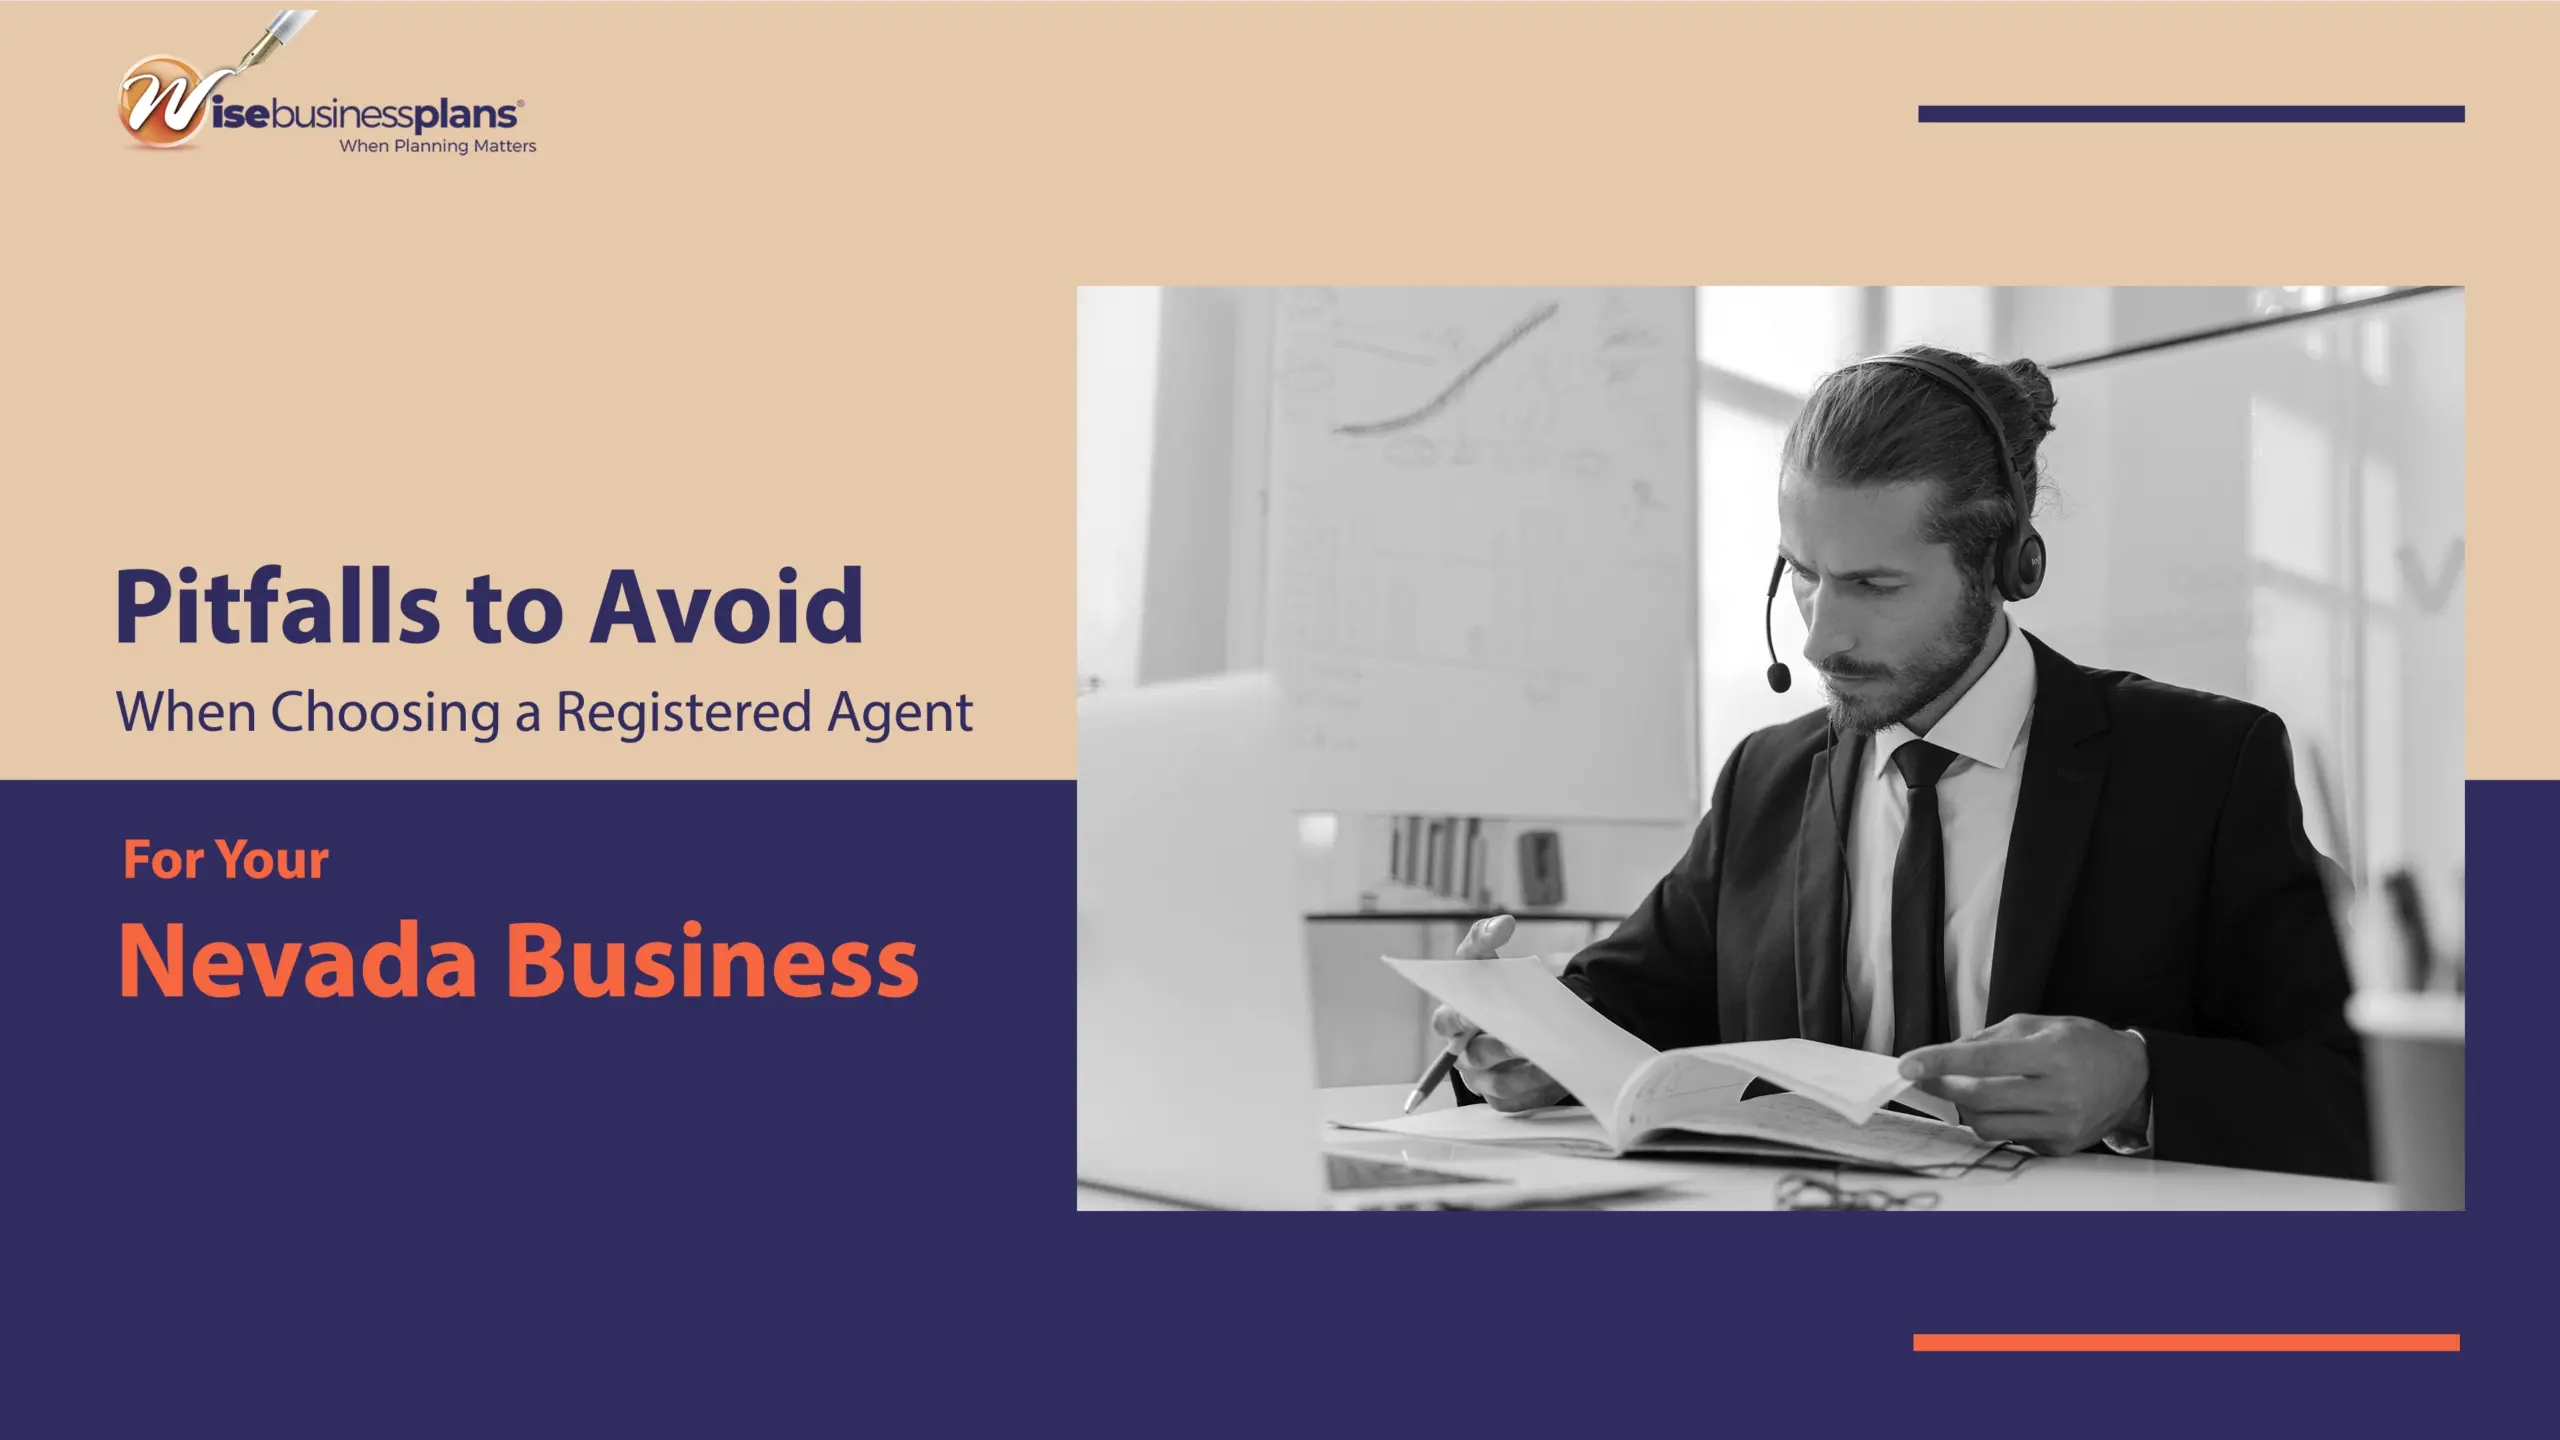 5 Pitfalls to Avoid When Choosing a Registered Agent for Your Nevada Business